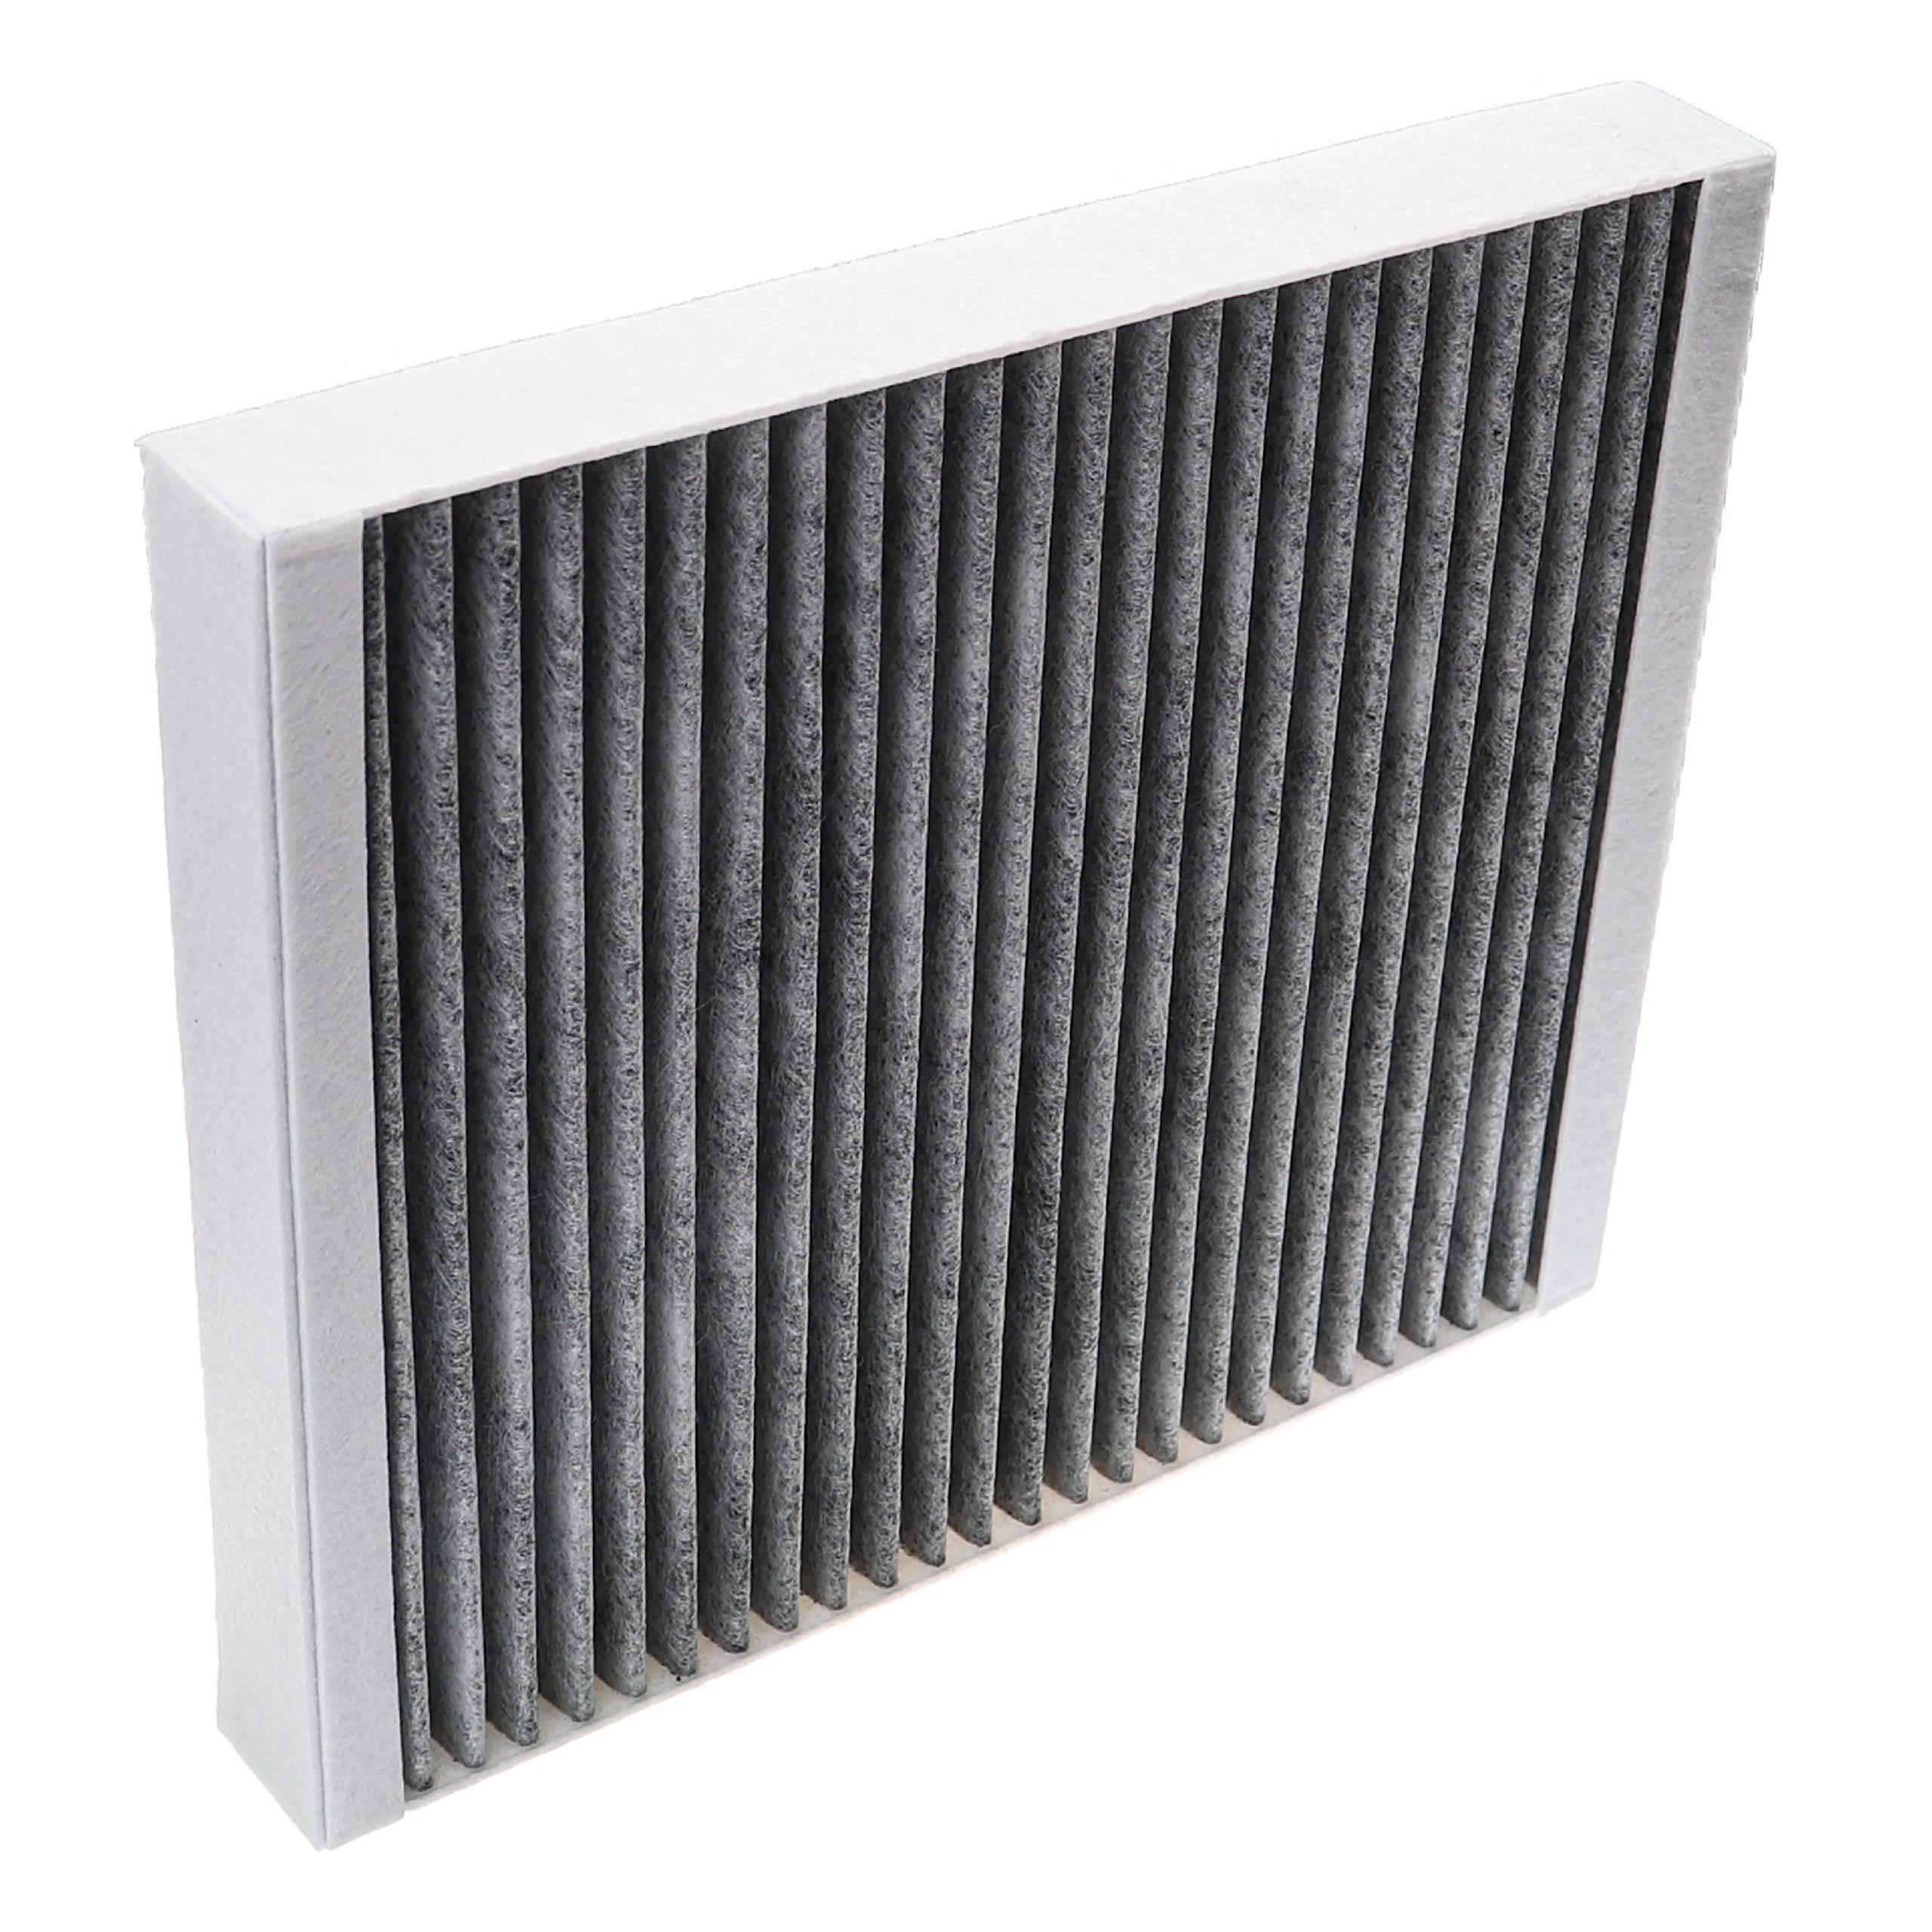 Cabin Air Filter replaces 1A First Automotive C30428 etc.